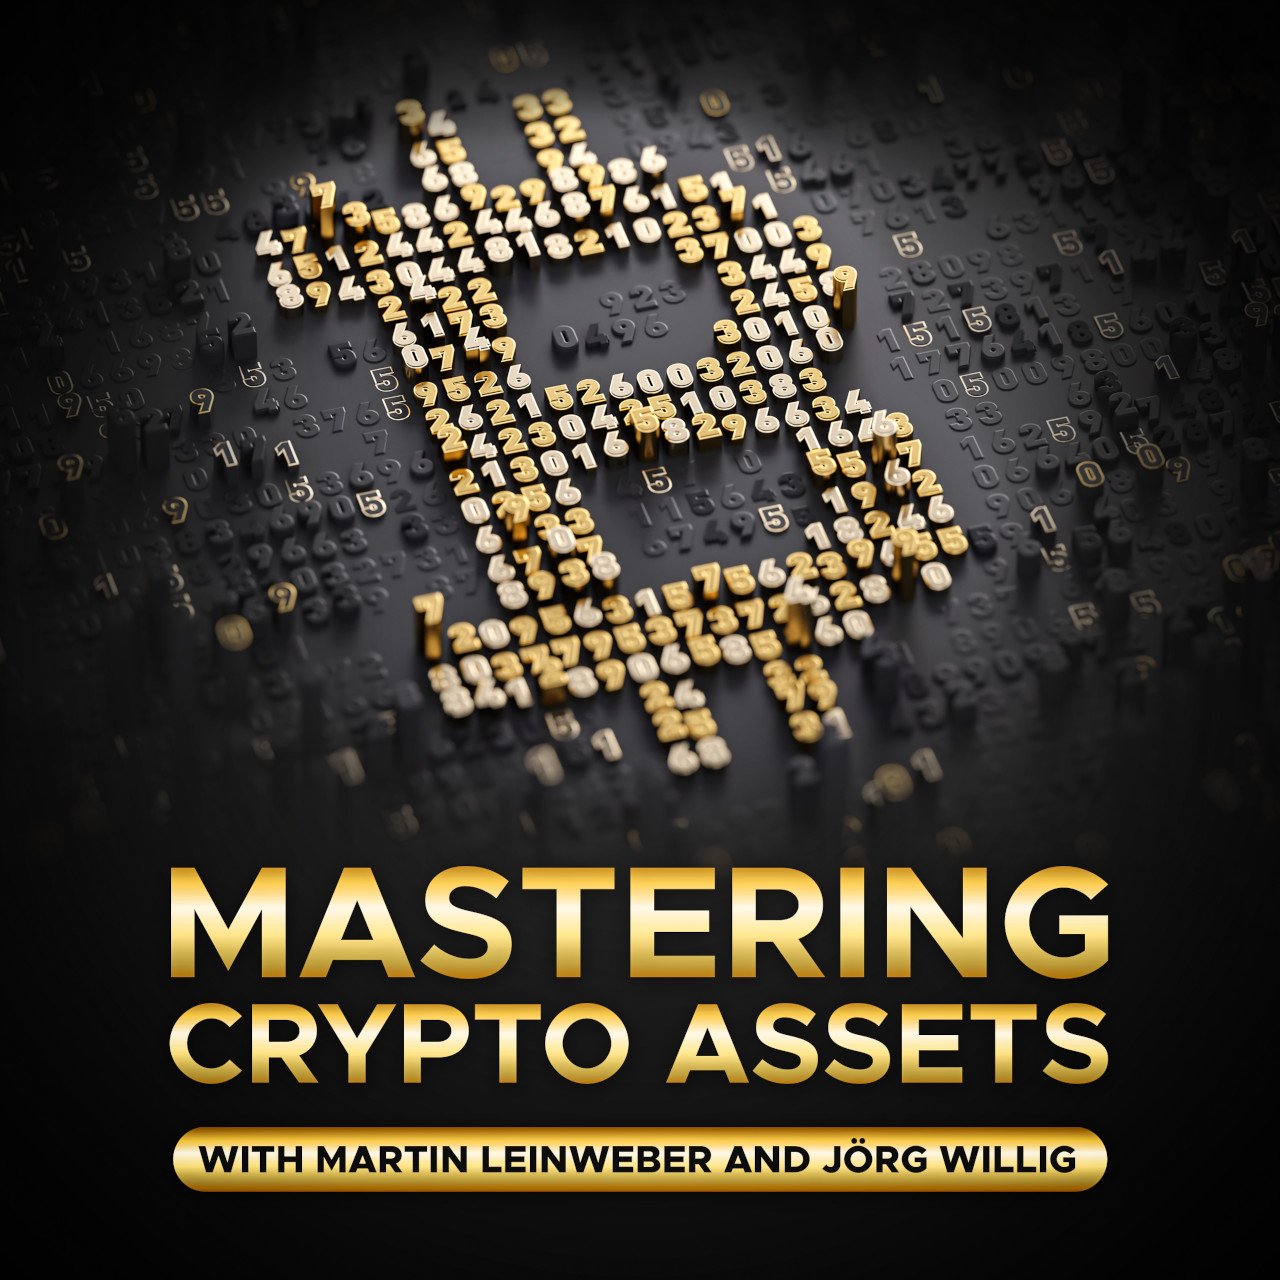 Mastering Crypto Assets. The Book.